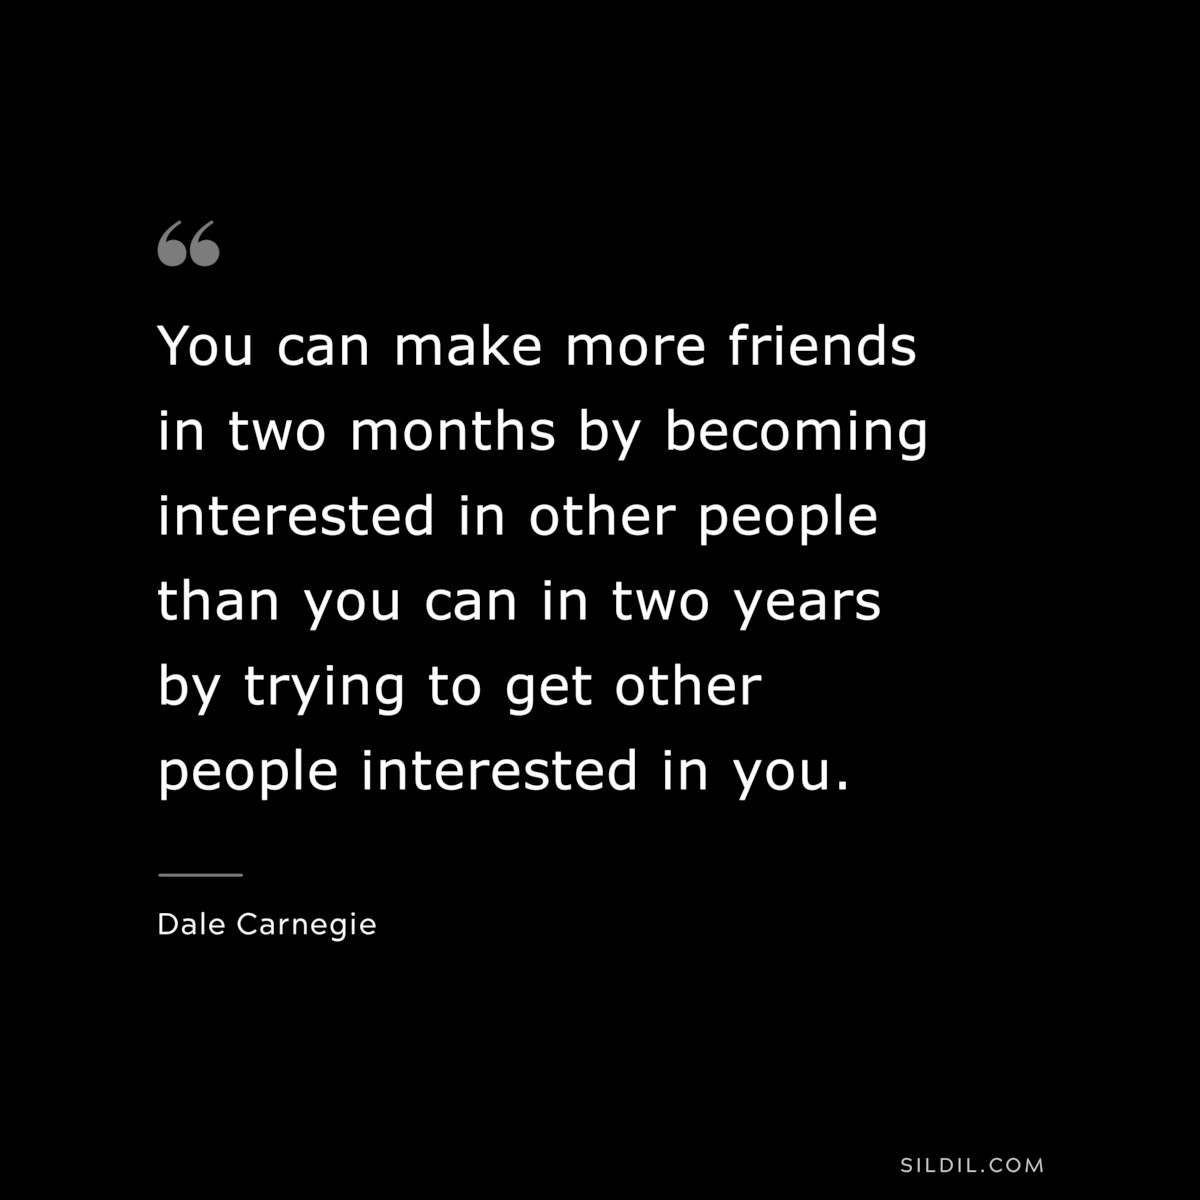 You can make more friends in two months by becoming interested in other people than you can in two years by trying to get other people interested in you.― Dale Carnegie